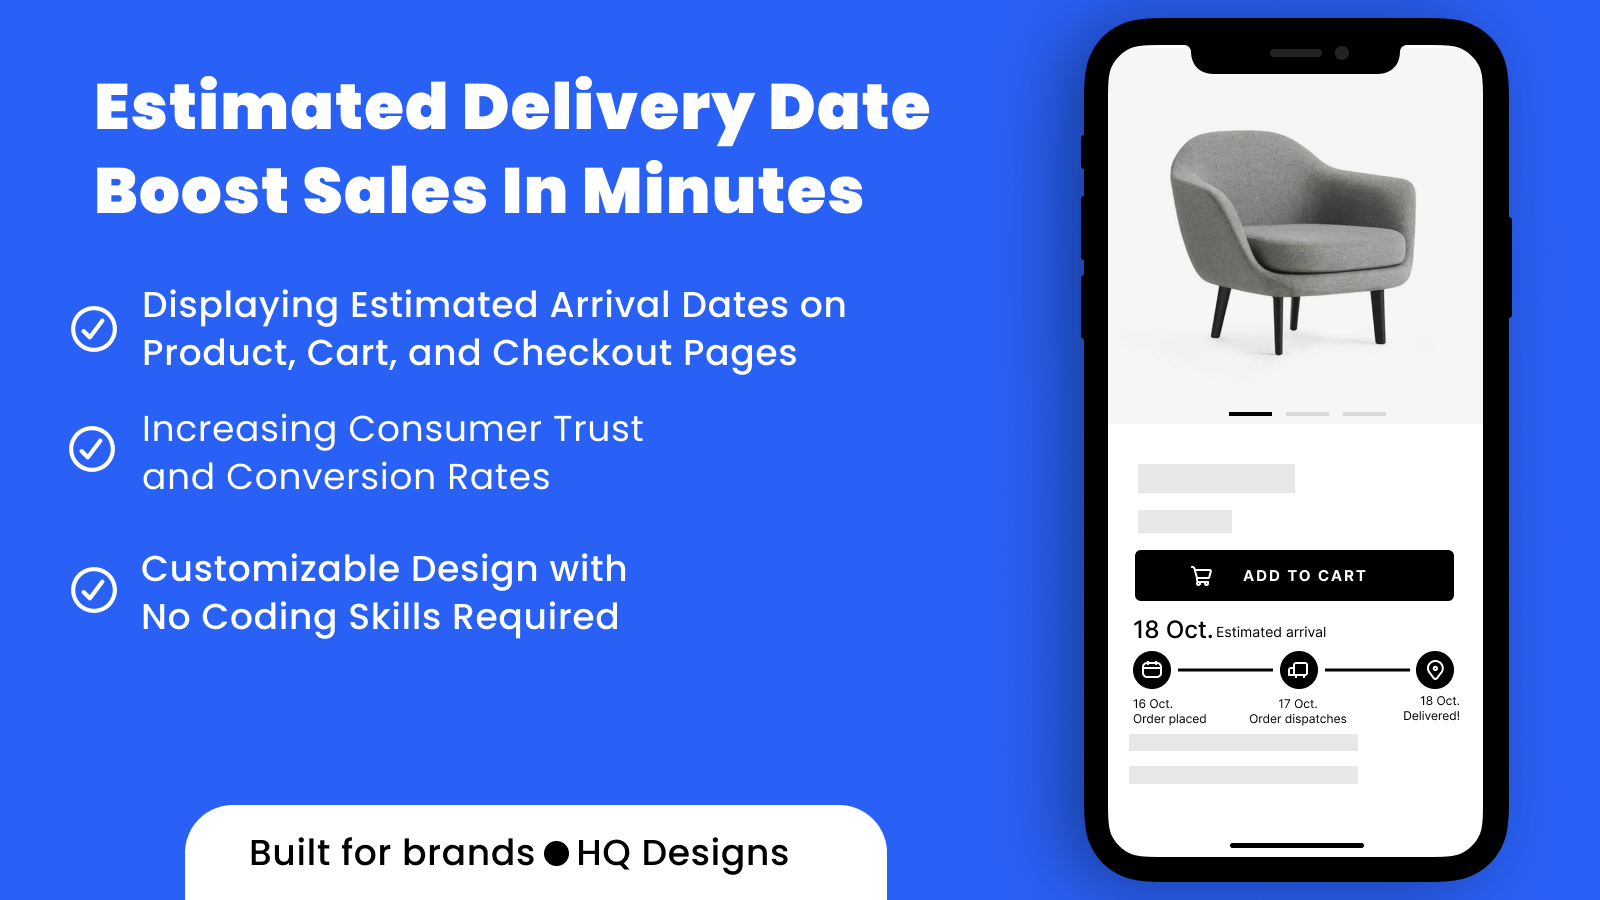 Estimated Delivery Date Boost Sales In Minutes 